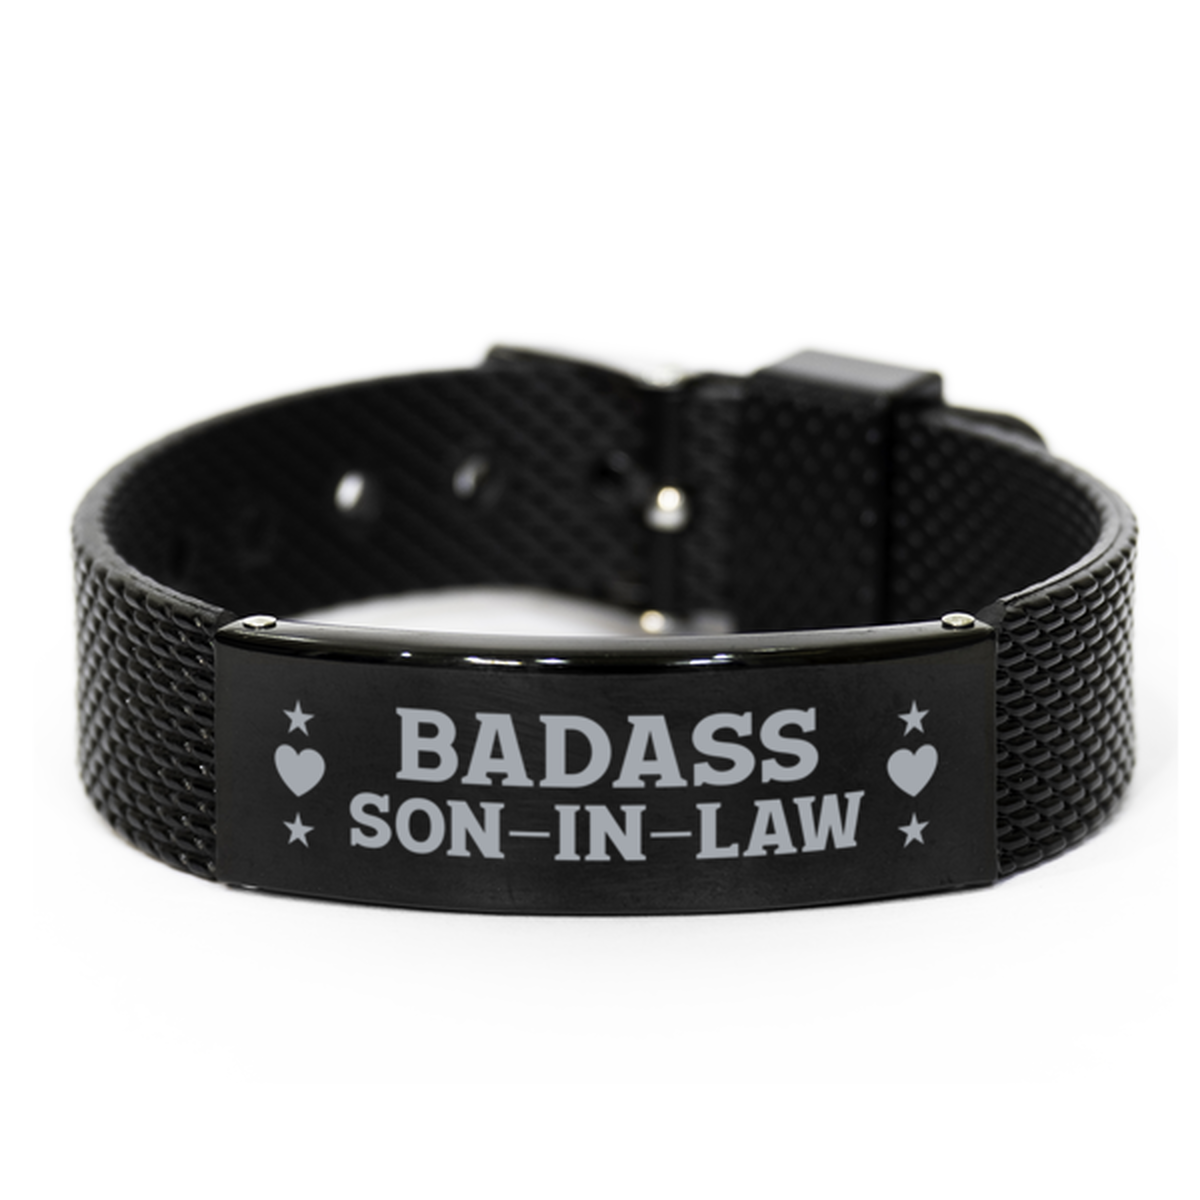 Son-in-law Black Shark Mesh Bracelet, Badass Son-in-law, Funny Family Gifts For Son-in-law From Dad Mom